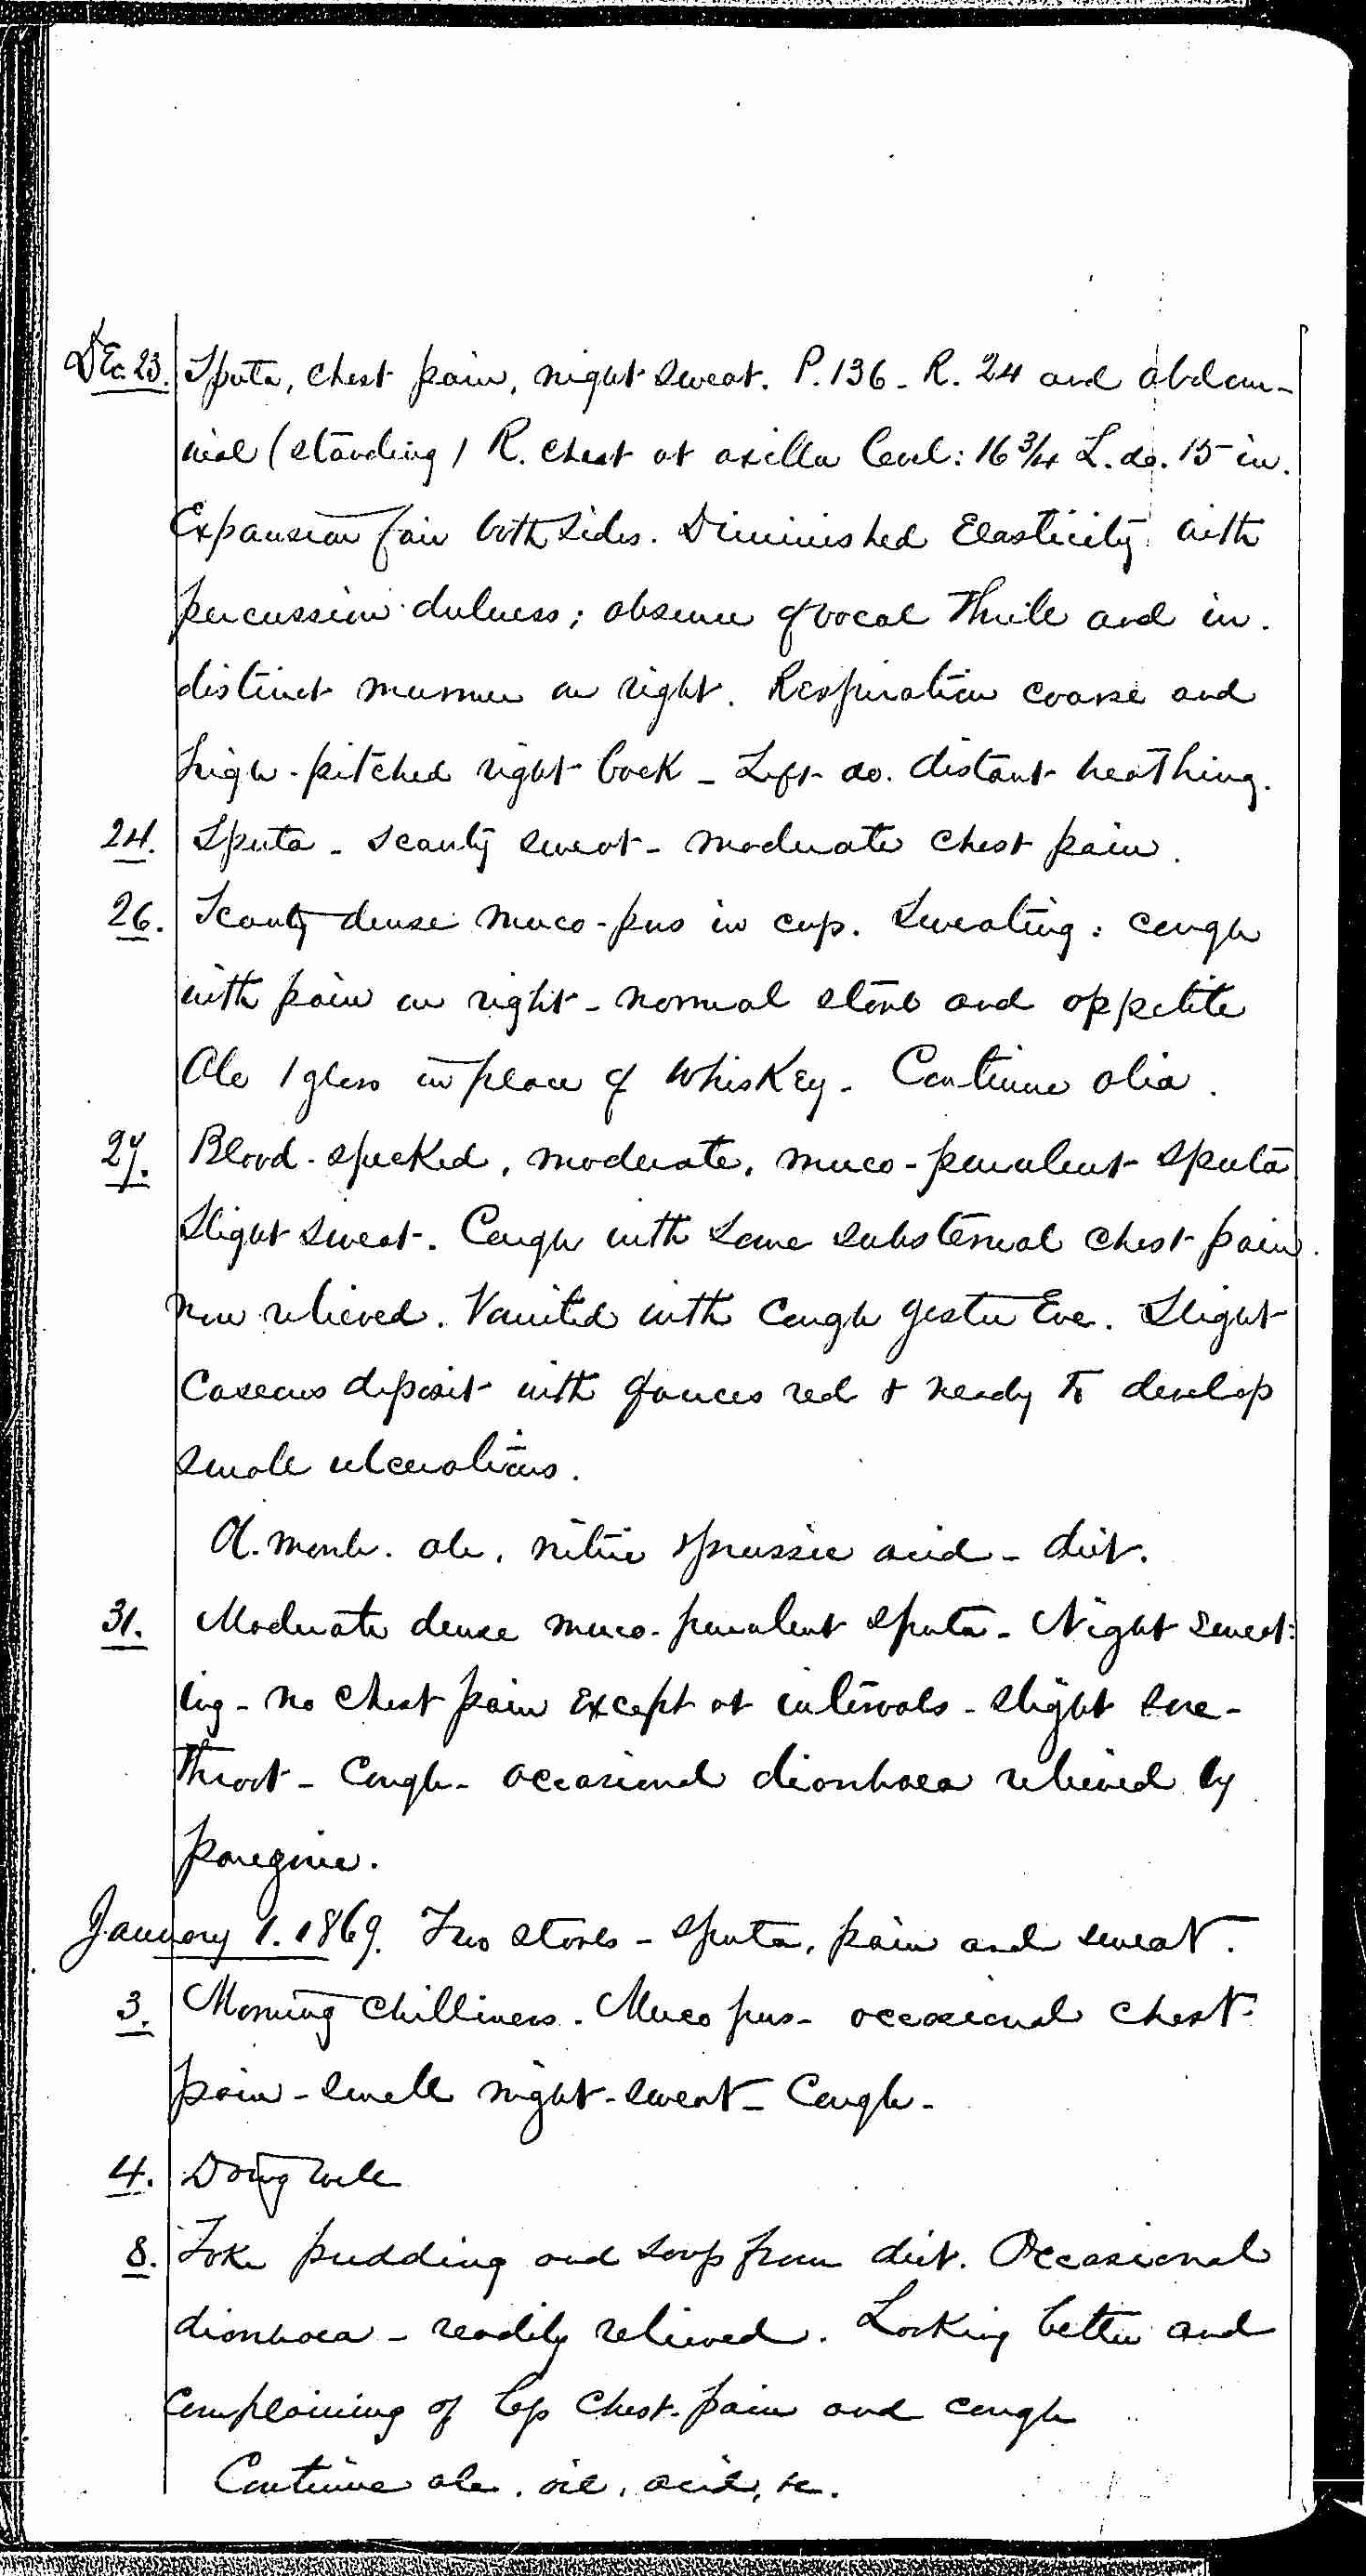 Entry for William Bathwell (page 4 of 13) in the log Hospital Tickets and Case Papers - Naval Hospital - Washington, D.C. - 1868-69